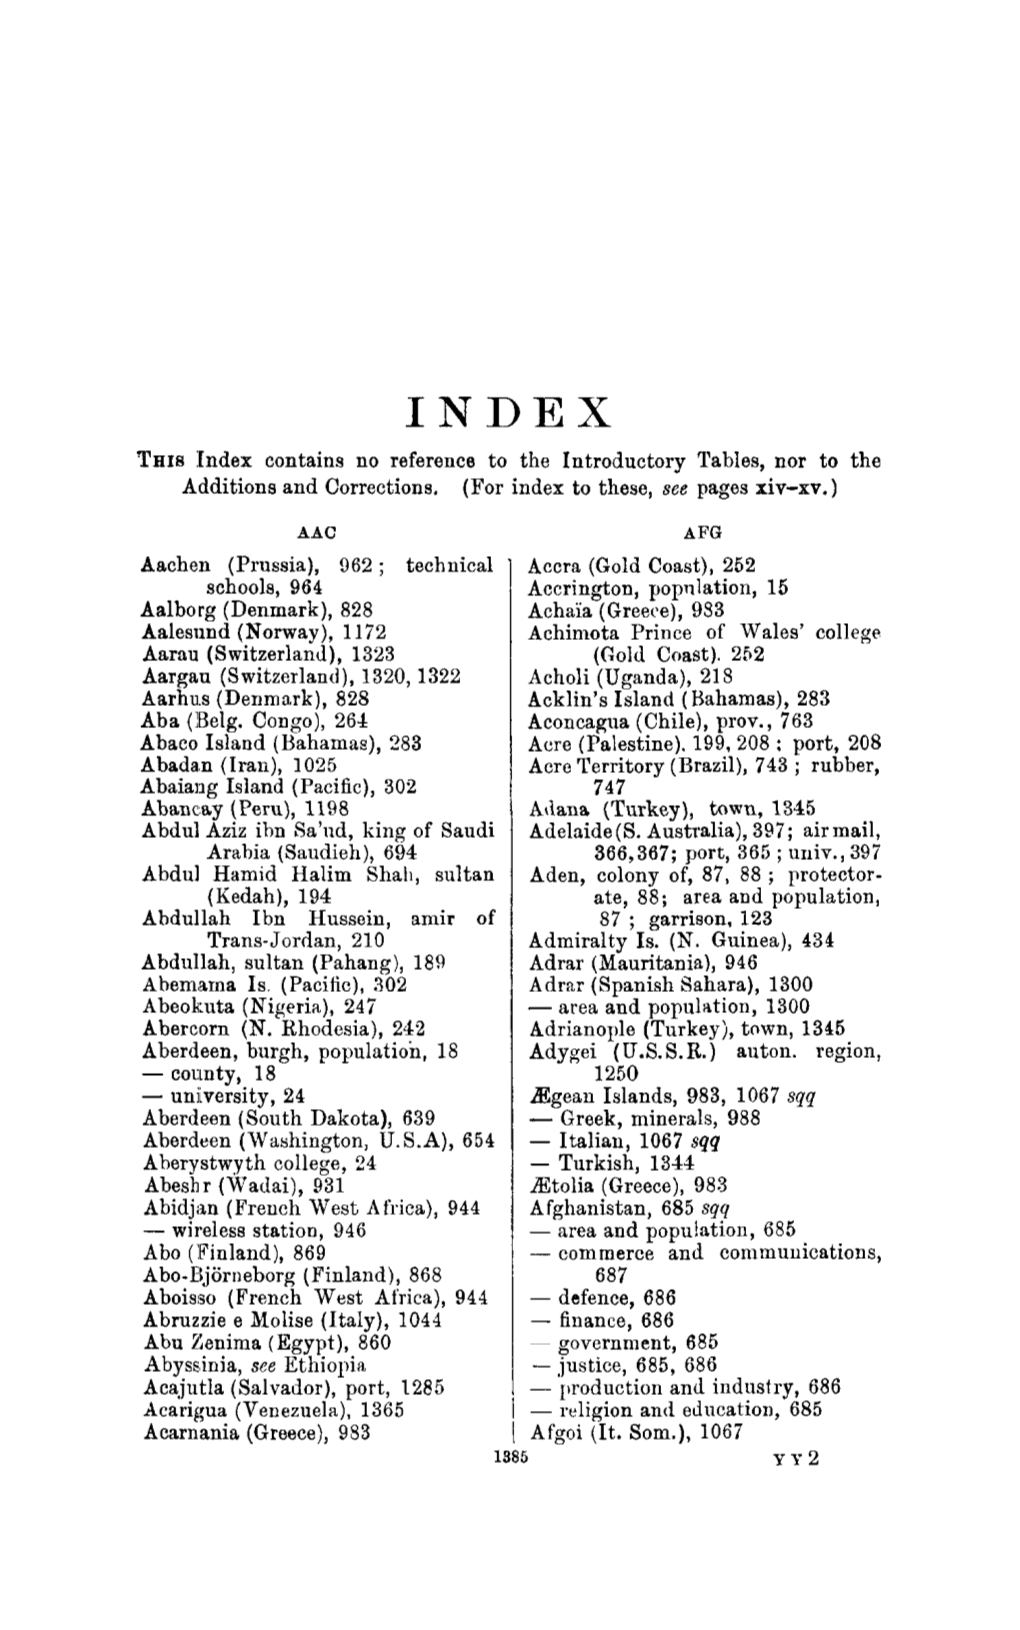 THIS Index Contains No Reference to the Introductory Tables, Nor to the Additions and Corrections